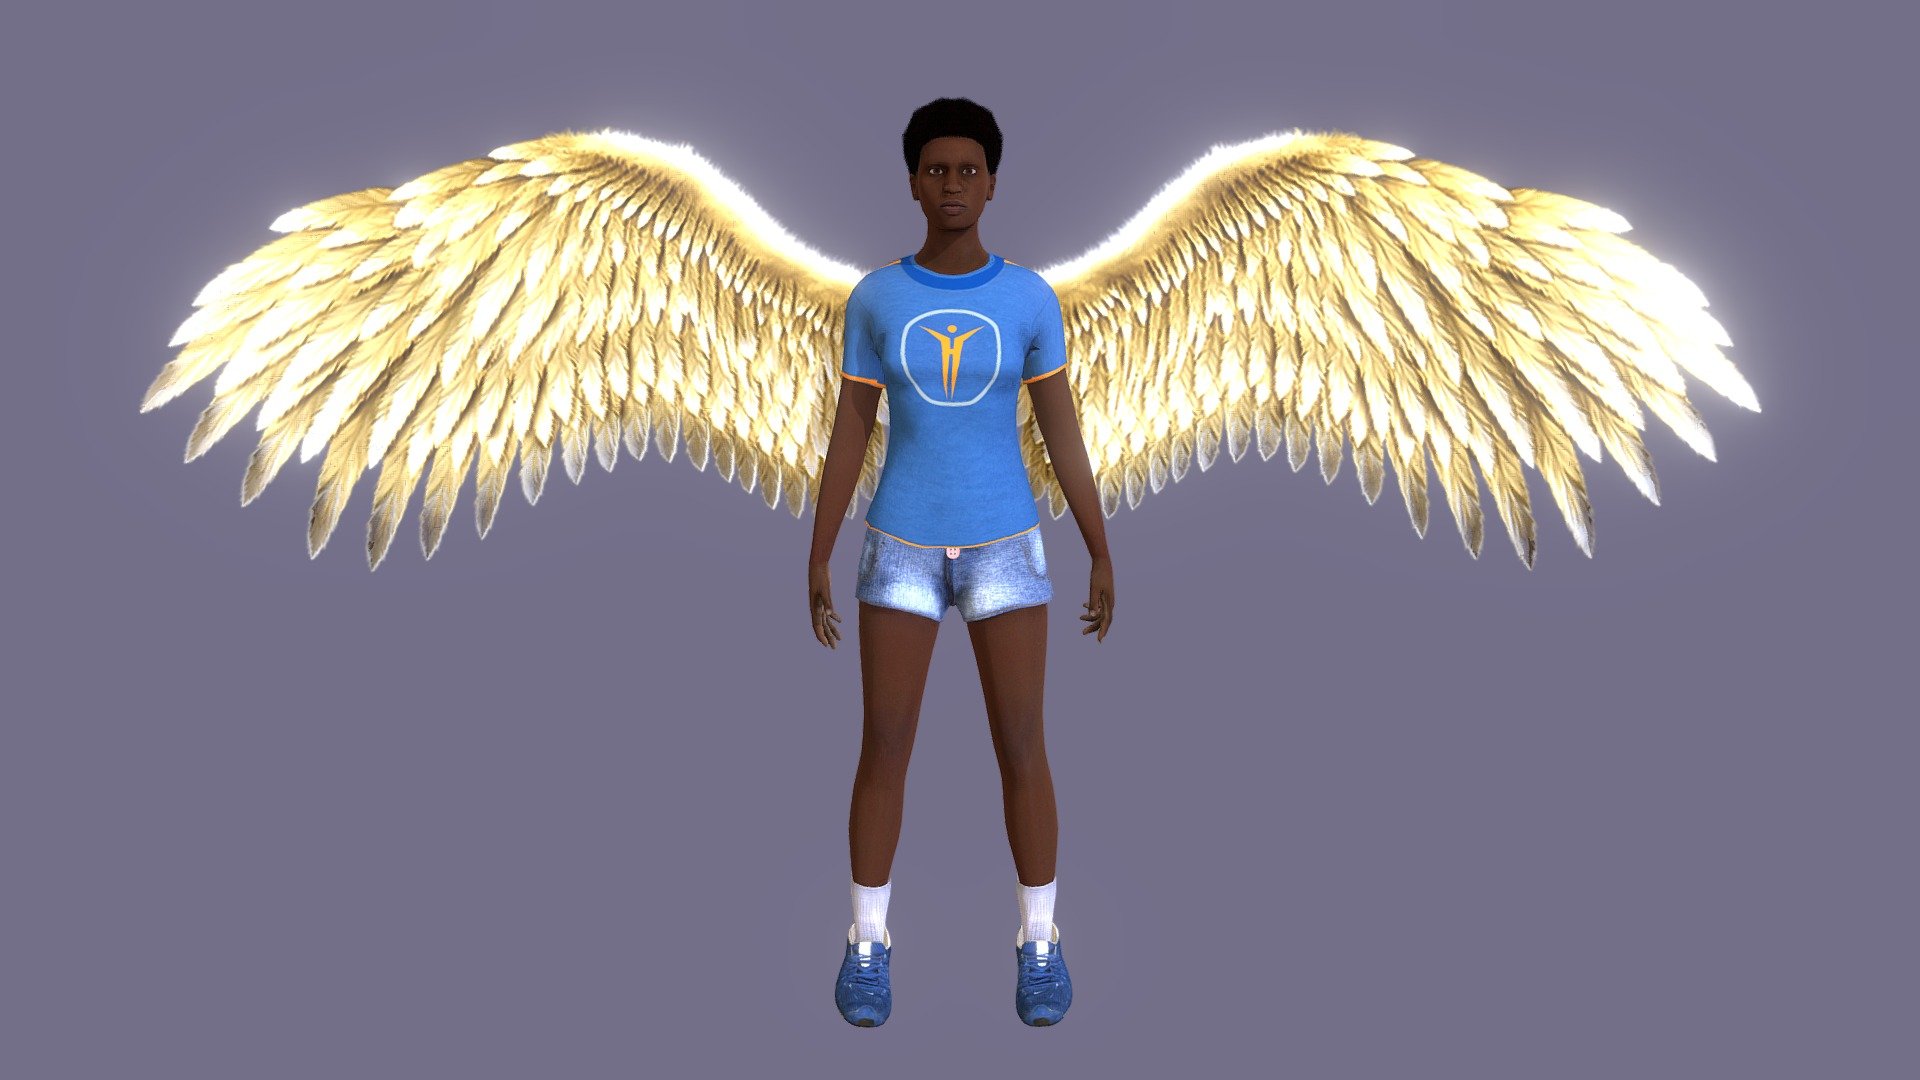 These very low poly realistic like style dark angel wings come animated and ready to attach to a character or object. This set is the 6th one of the wings collection assets we are releasing.

This base model example is from Makehuman software and it is just to feel better the Golden Wings animations.

Images:

4 Albedos- 2048 x 2048
Normal Map - 2048 x 2048
Ambient Occlusion - 2048 x 2048

Vert count - 204 Tri count - 400

These wings have your own animations:

_Initial_Pose, Idle, Idle_2, Fly_1, Fly_2, Fly_3, Plane_1, Plane_2, Block_1, Block_2

Bugsproblems
eed more animations or budget =&gt; Dr.Carvalho#2557 (discord) - Golden Angel Wings Animations With Model Example - Buy Royalty Free 3D model by Leonardo Carvalho (@livrosparacriancas) 3d model